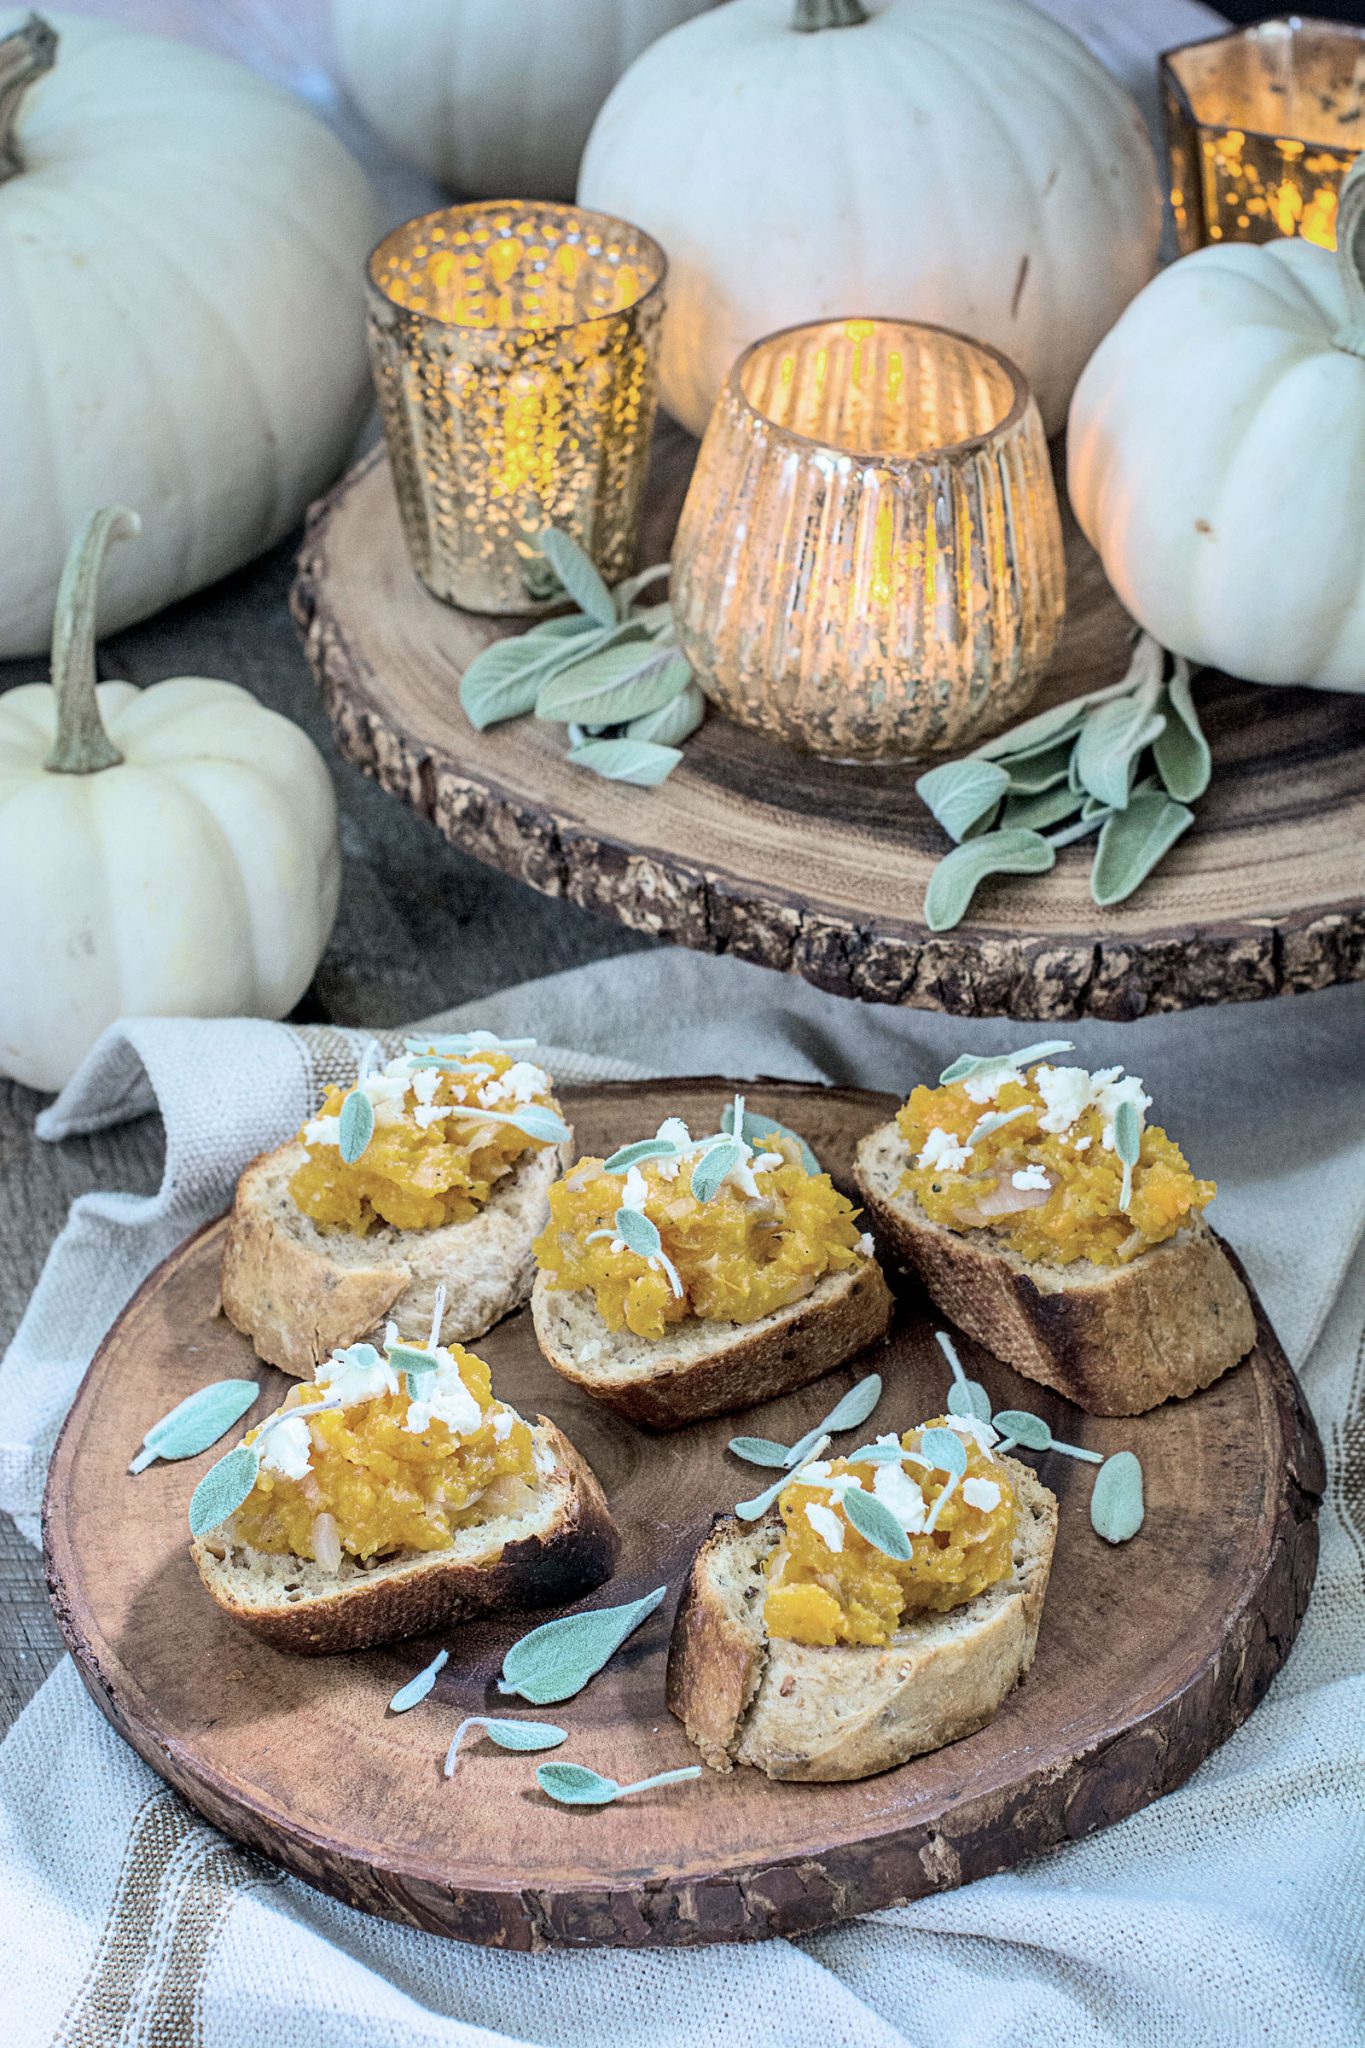 Sage with Butternut Squash Bruschetta recipe, the perfect appetizer pairing for your Thanksgiving gathering! @SonomaCutrer #21andup #SonomaCutrer #ad